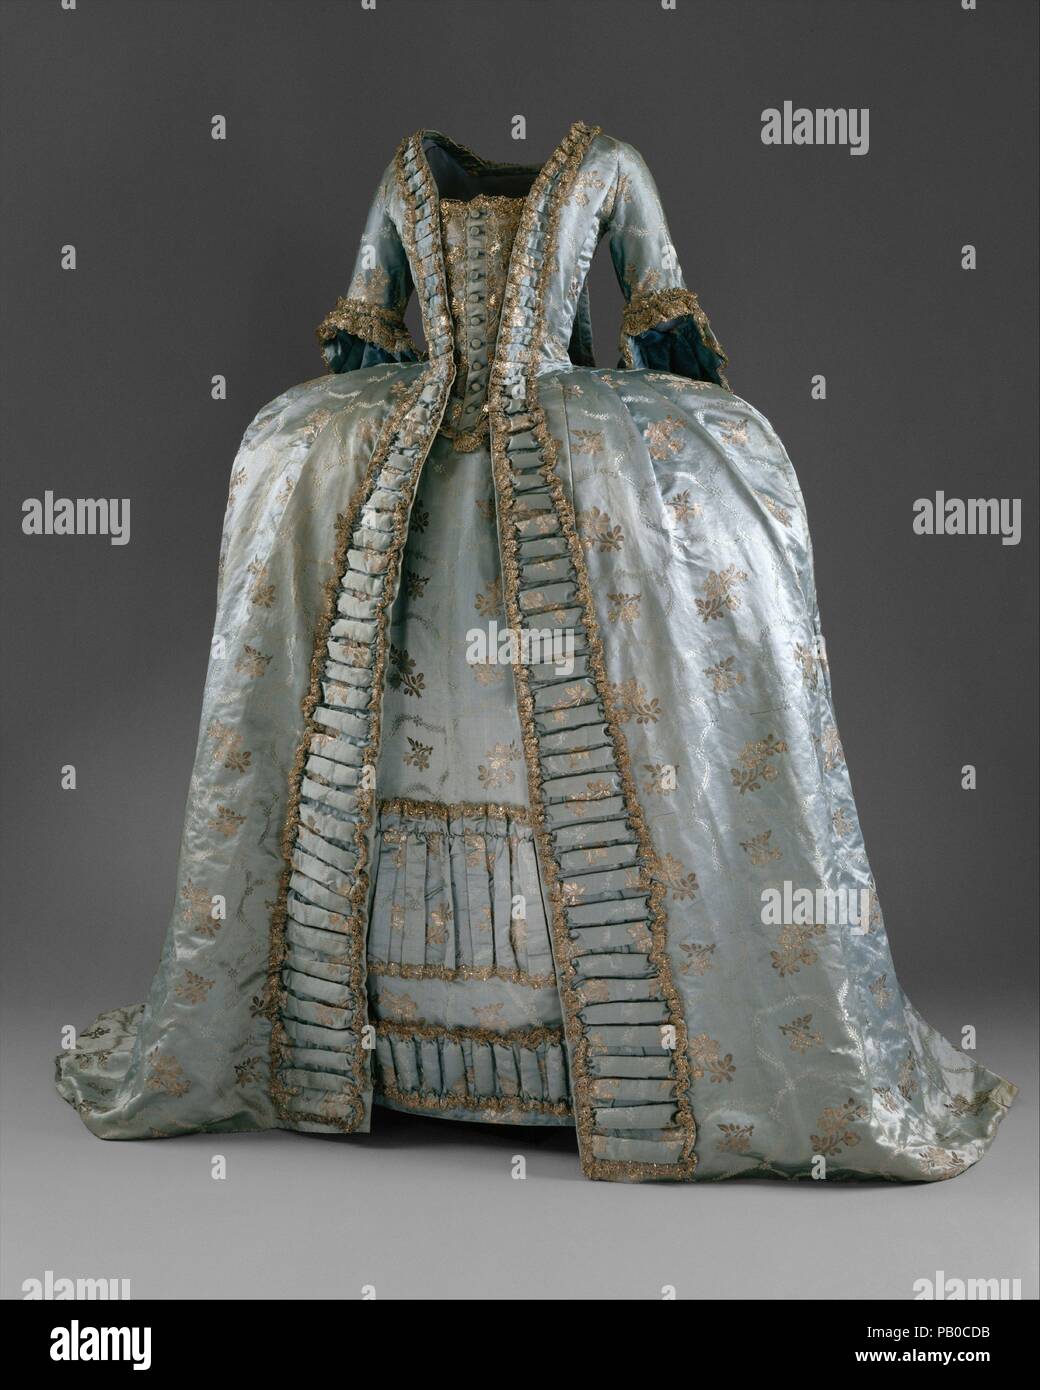 Robe à la Française. Culture: European. Date: ca. 1765.  Like the Mantua, the sack, or sacque, dress began life as an informal garment. It was initially a French fashion, its defining feature being the row of two double box pleats sewn in at the center of the neckline at the back of the dress and falling to the hem. The early form of the gown was loose and unstructured, falling from the shoulders in a bell-like shape. This evoked many comments on the potential for immoral behavior, with the consequences safely concealed by the voluminous gown. A sack was always worn over stays (a corset) and g Stock Photo